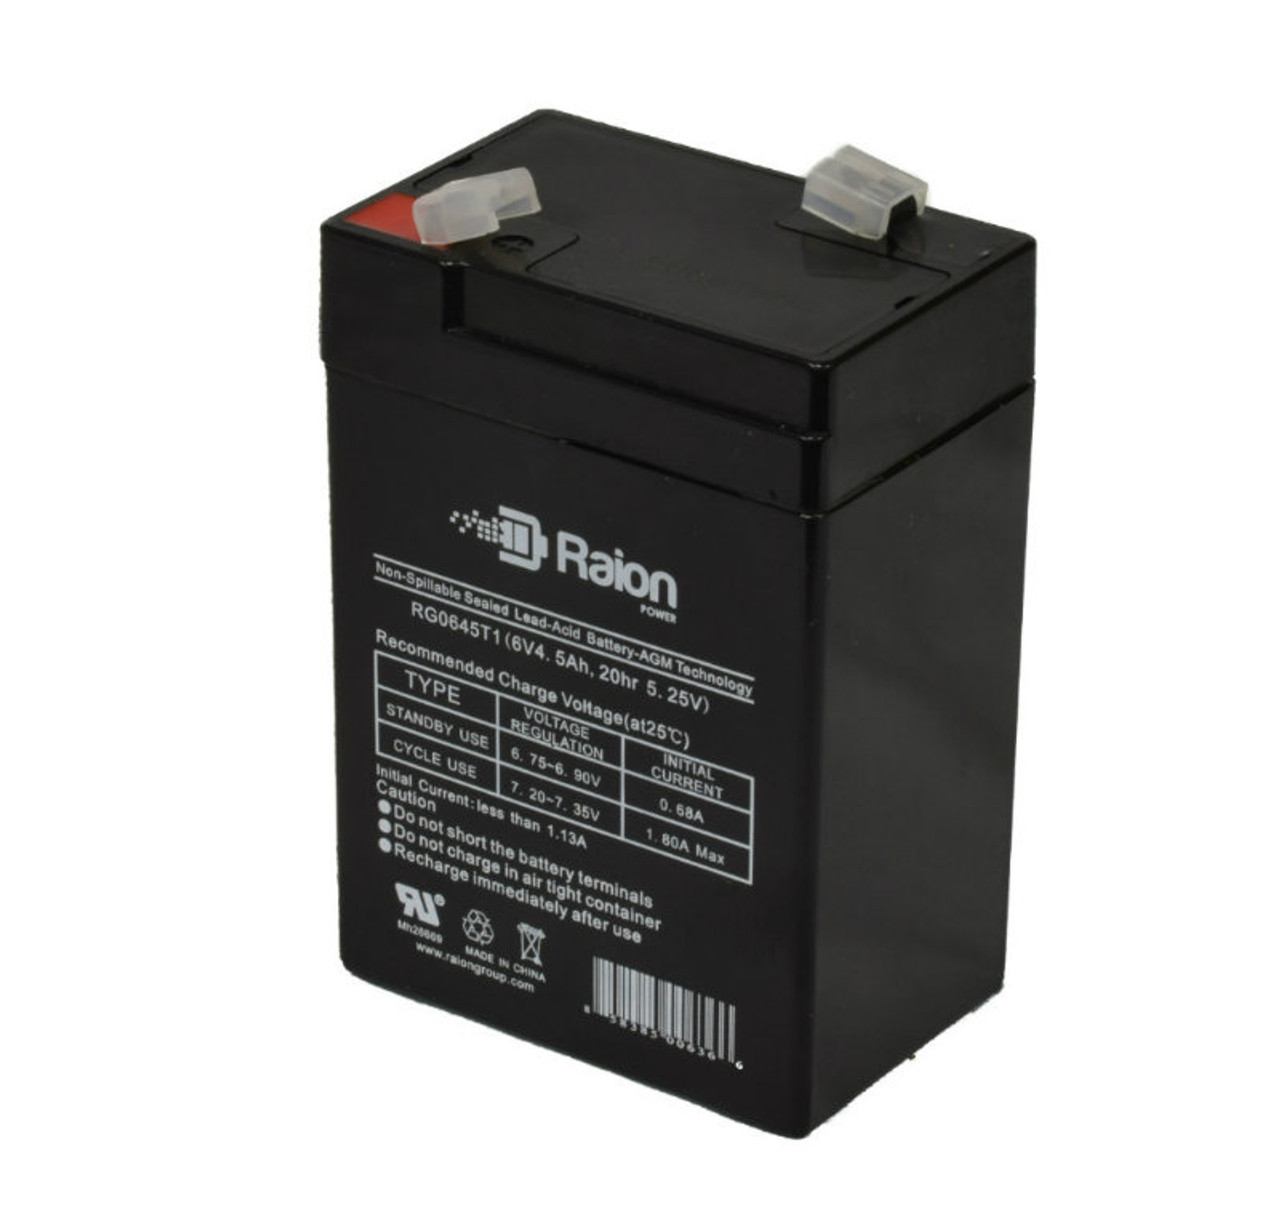 Raion Power RG0645T1 6V 4.5Ah Replacement Battery Cartridge for Dyna-Ray S18186